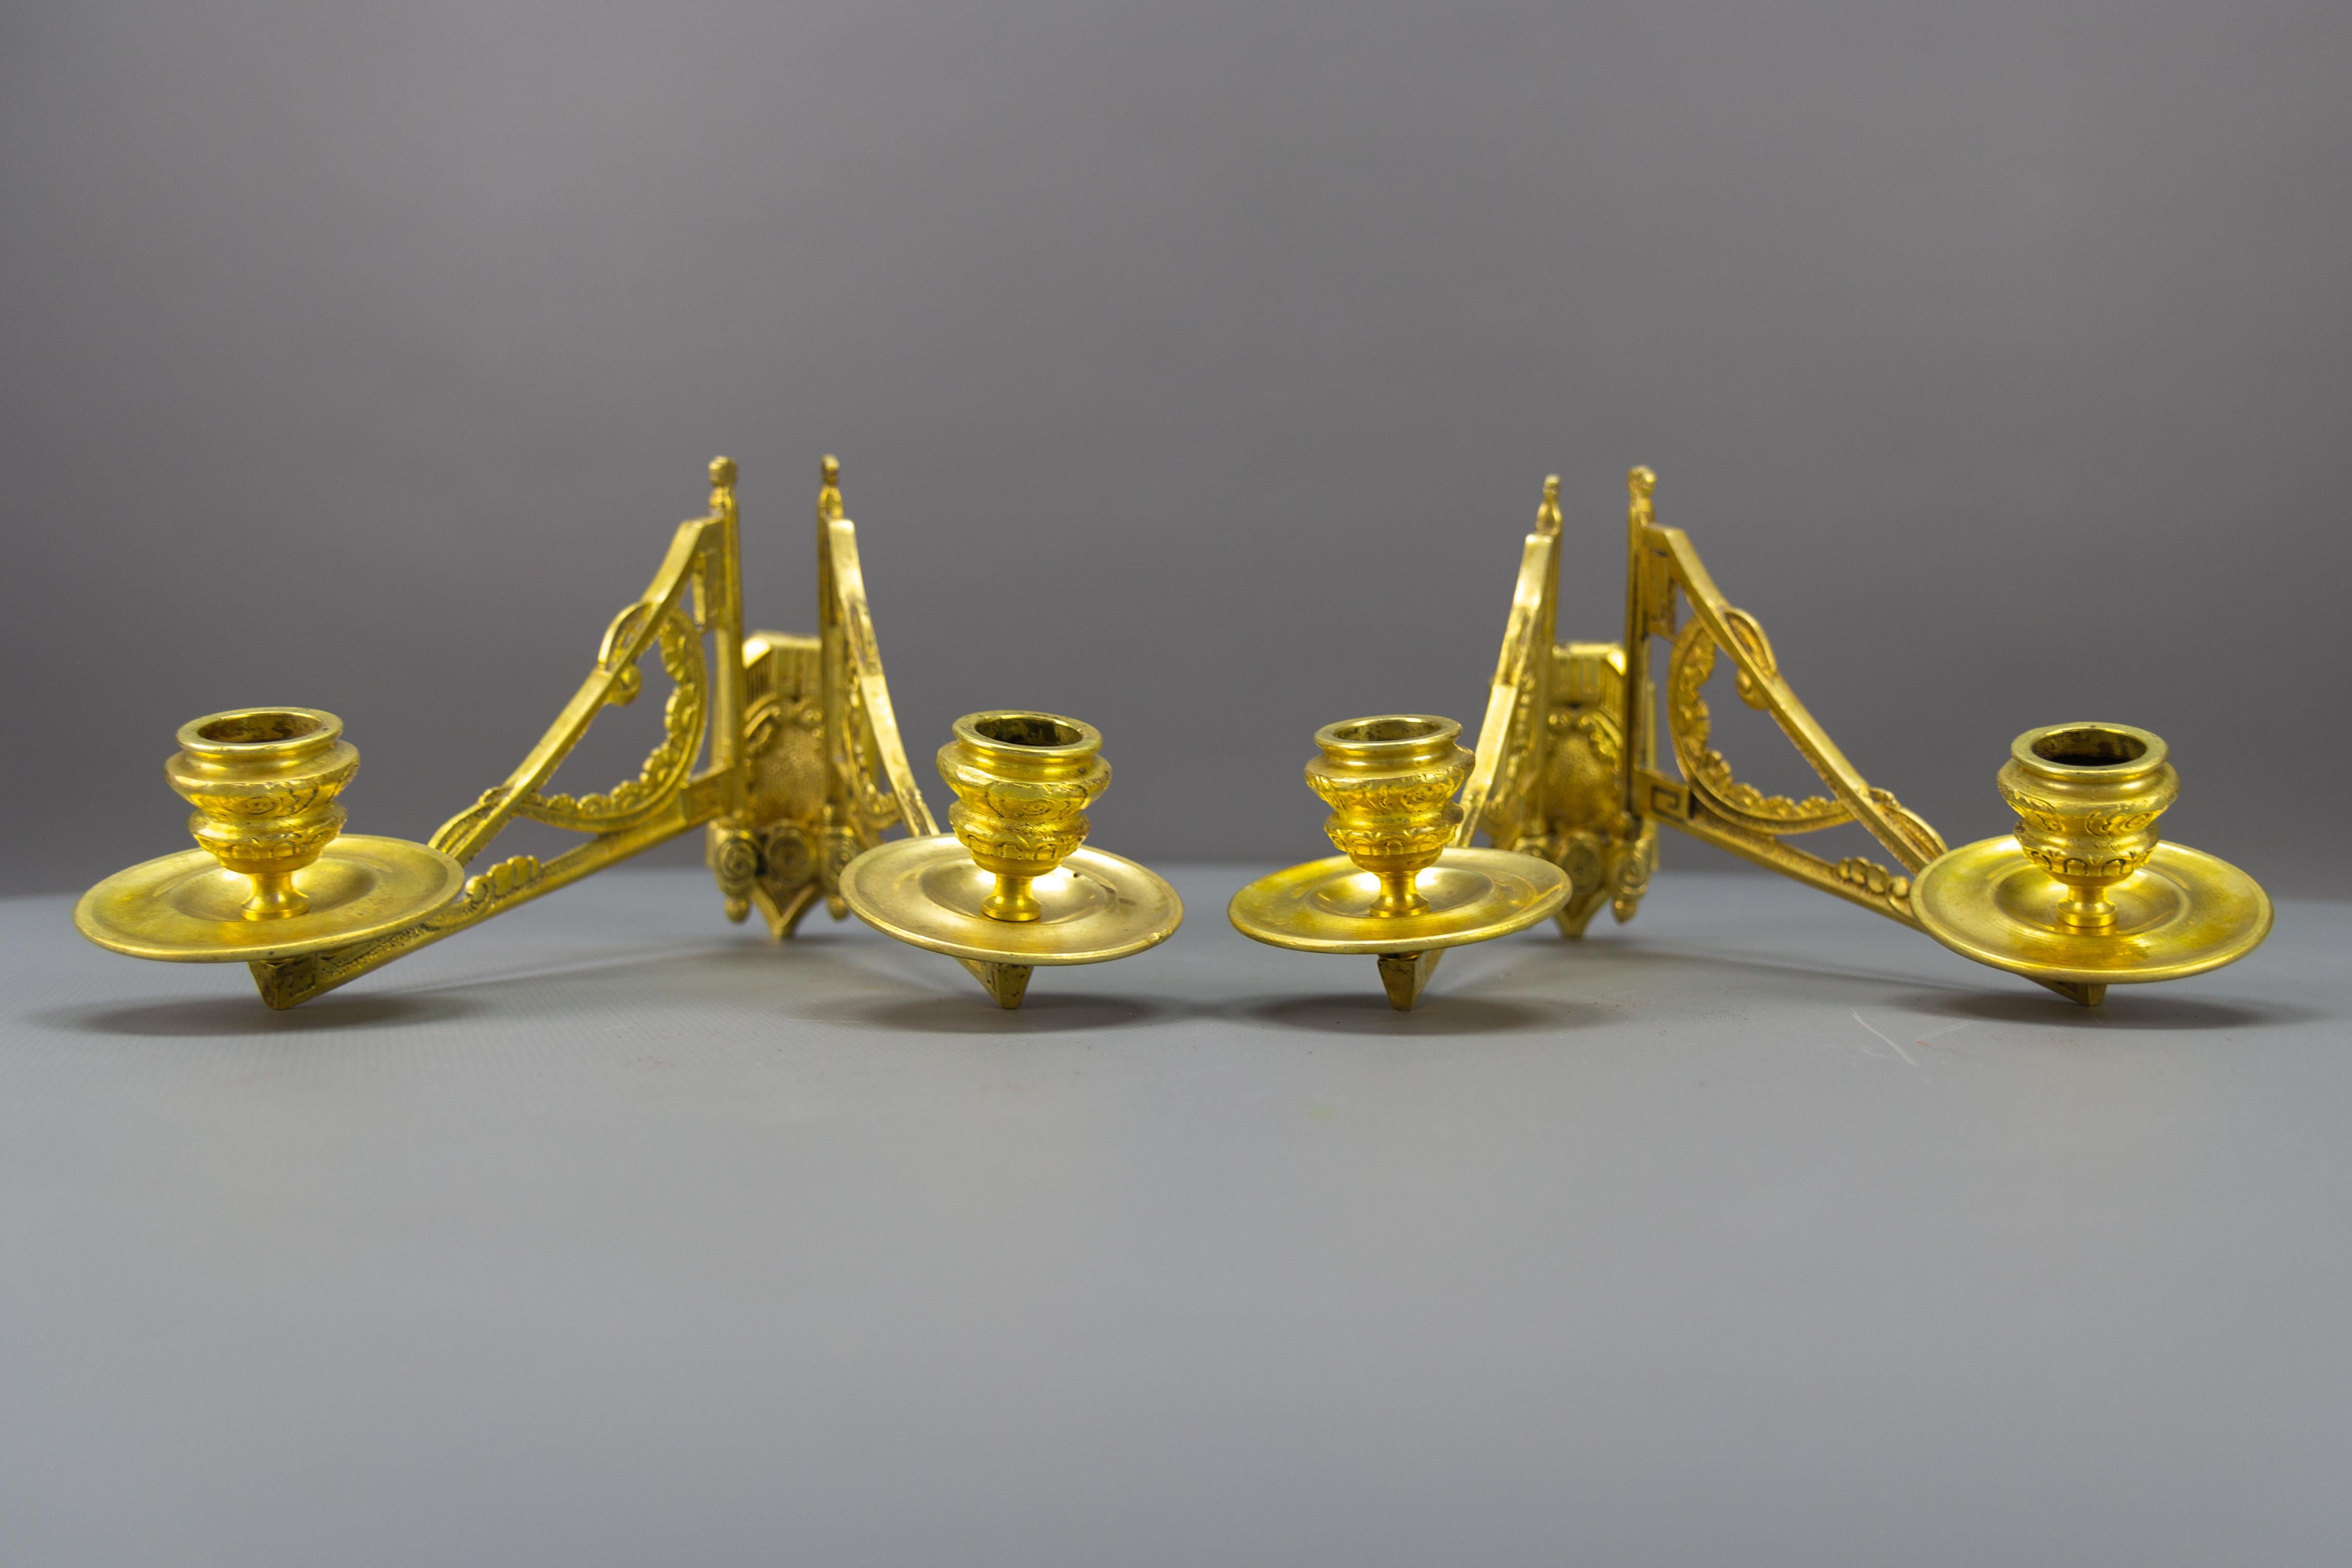 A pair of Art Deco ornate piano or wall lights, candleholders by Leon Pinet. Each sconce has two arms, each for one candle, with beautiful Art Deco flower motifs. Numbered and marked L. Pinet on the back side, France, ca 1930.
Dimensions: Height 14